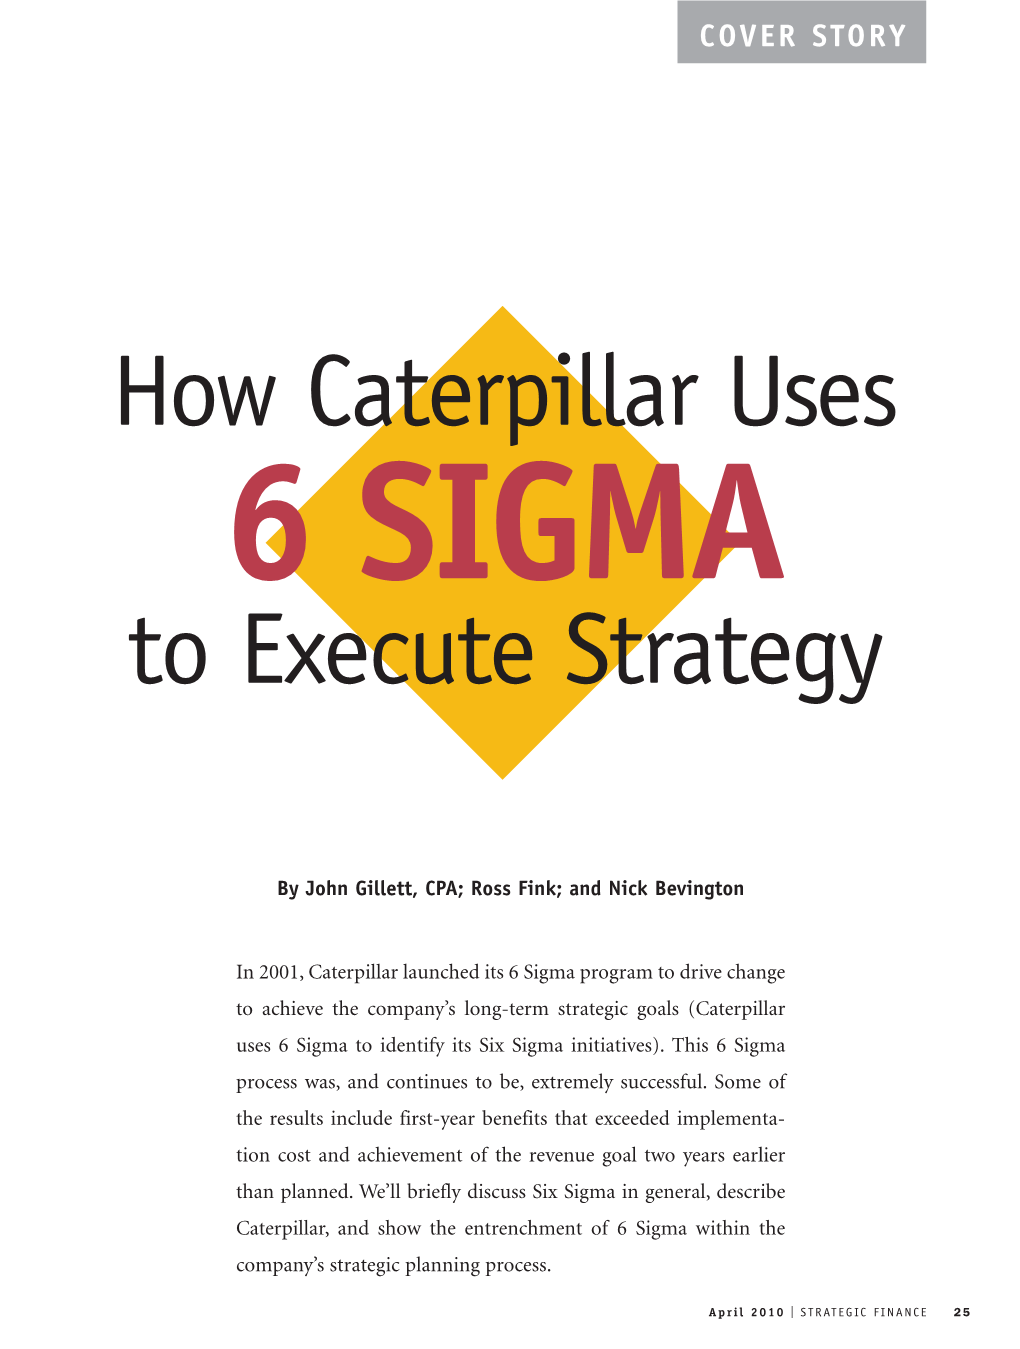 How Caterpillar Uses to Execute Strategy